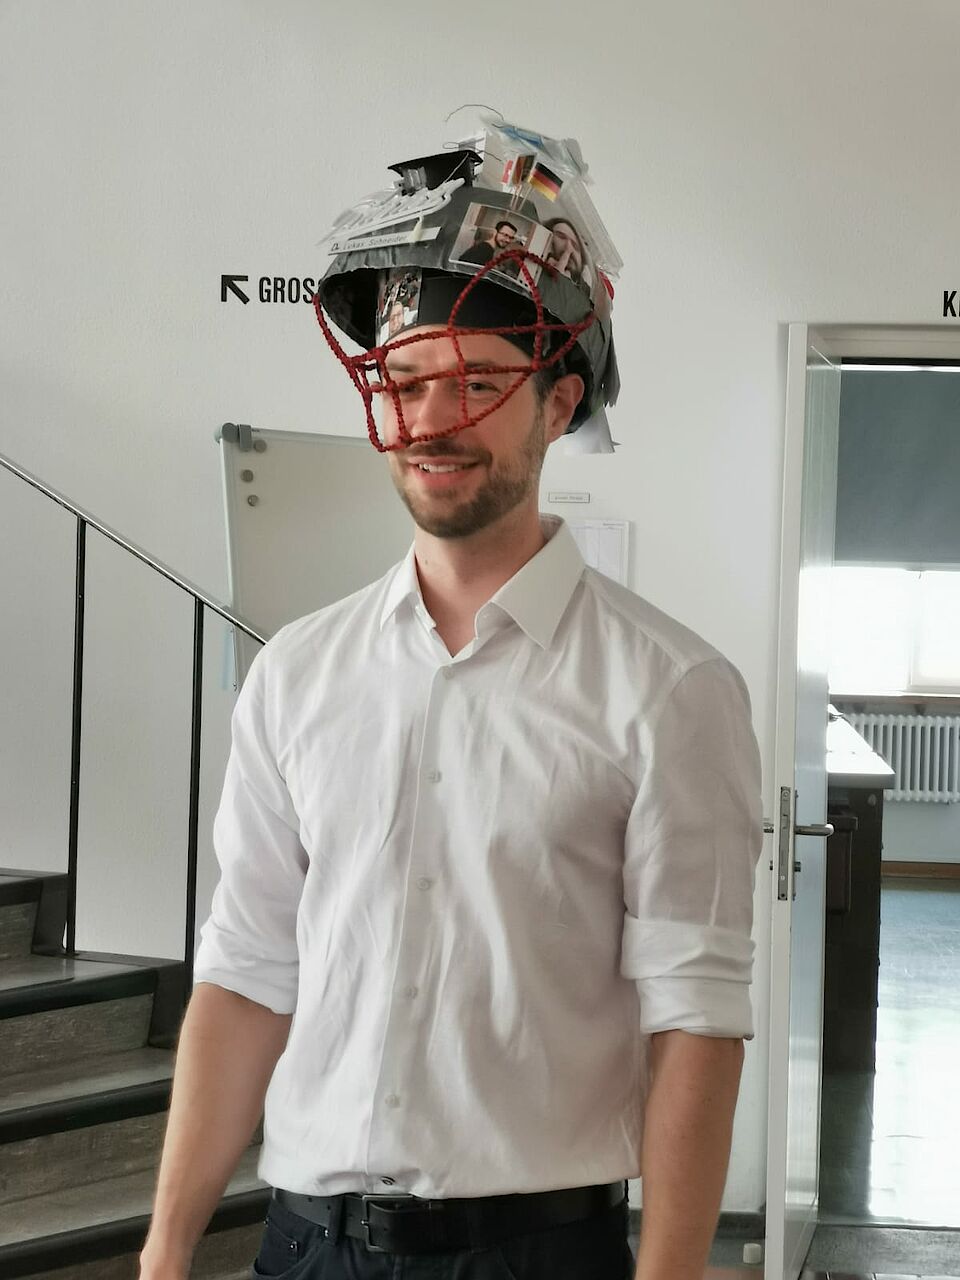 Dr Lukas Schneider wearing his hat after his successful oral examination. The hat looks like a football helmet dyed in the colors of the patriots.